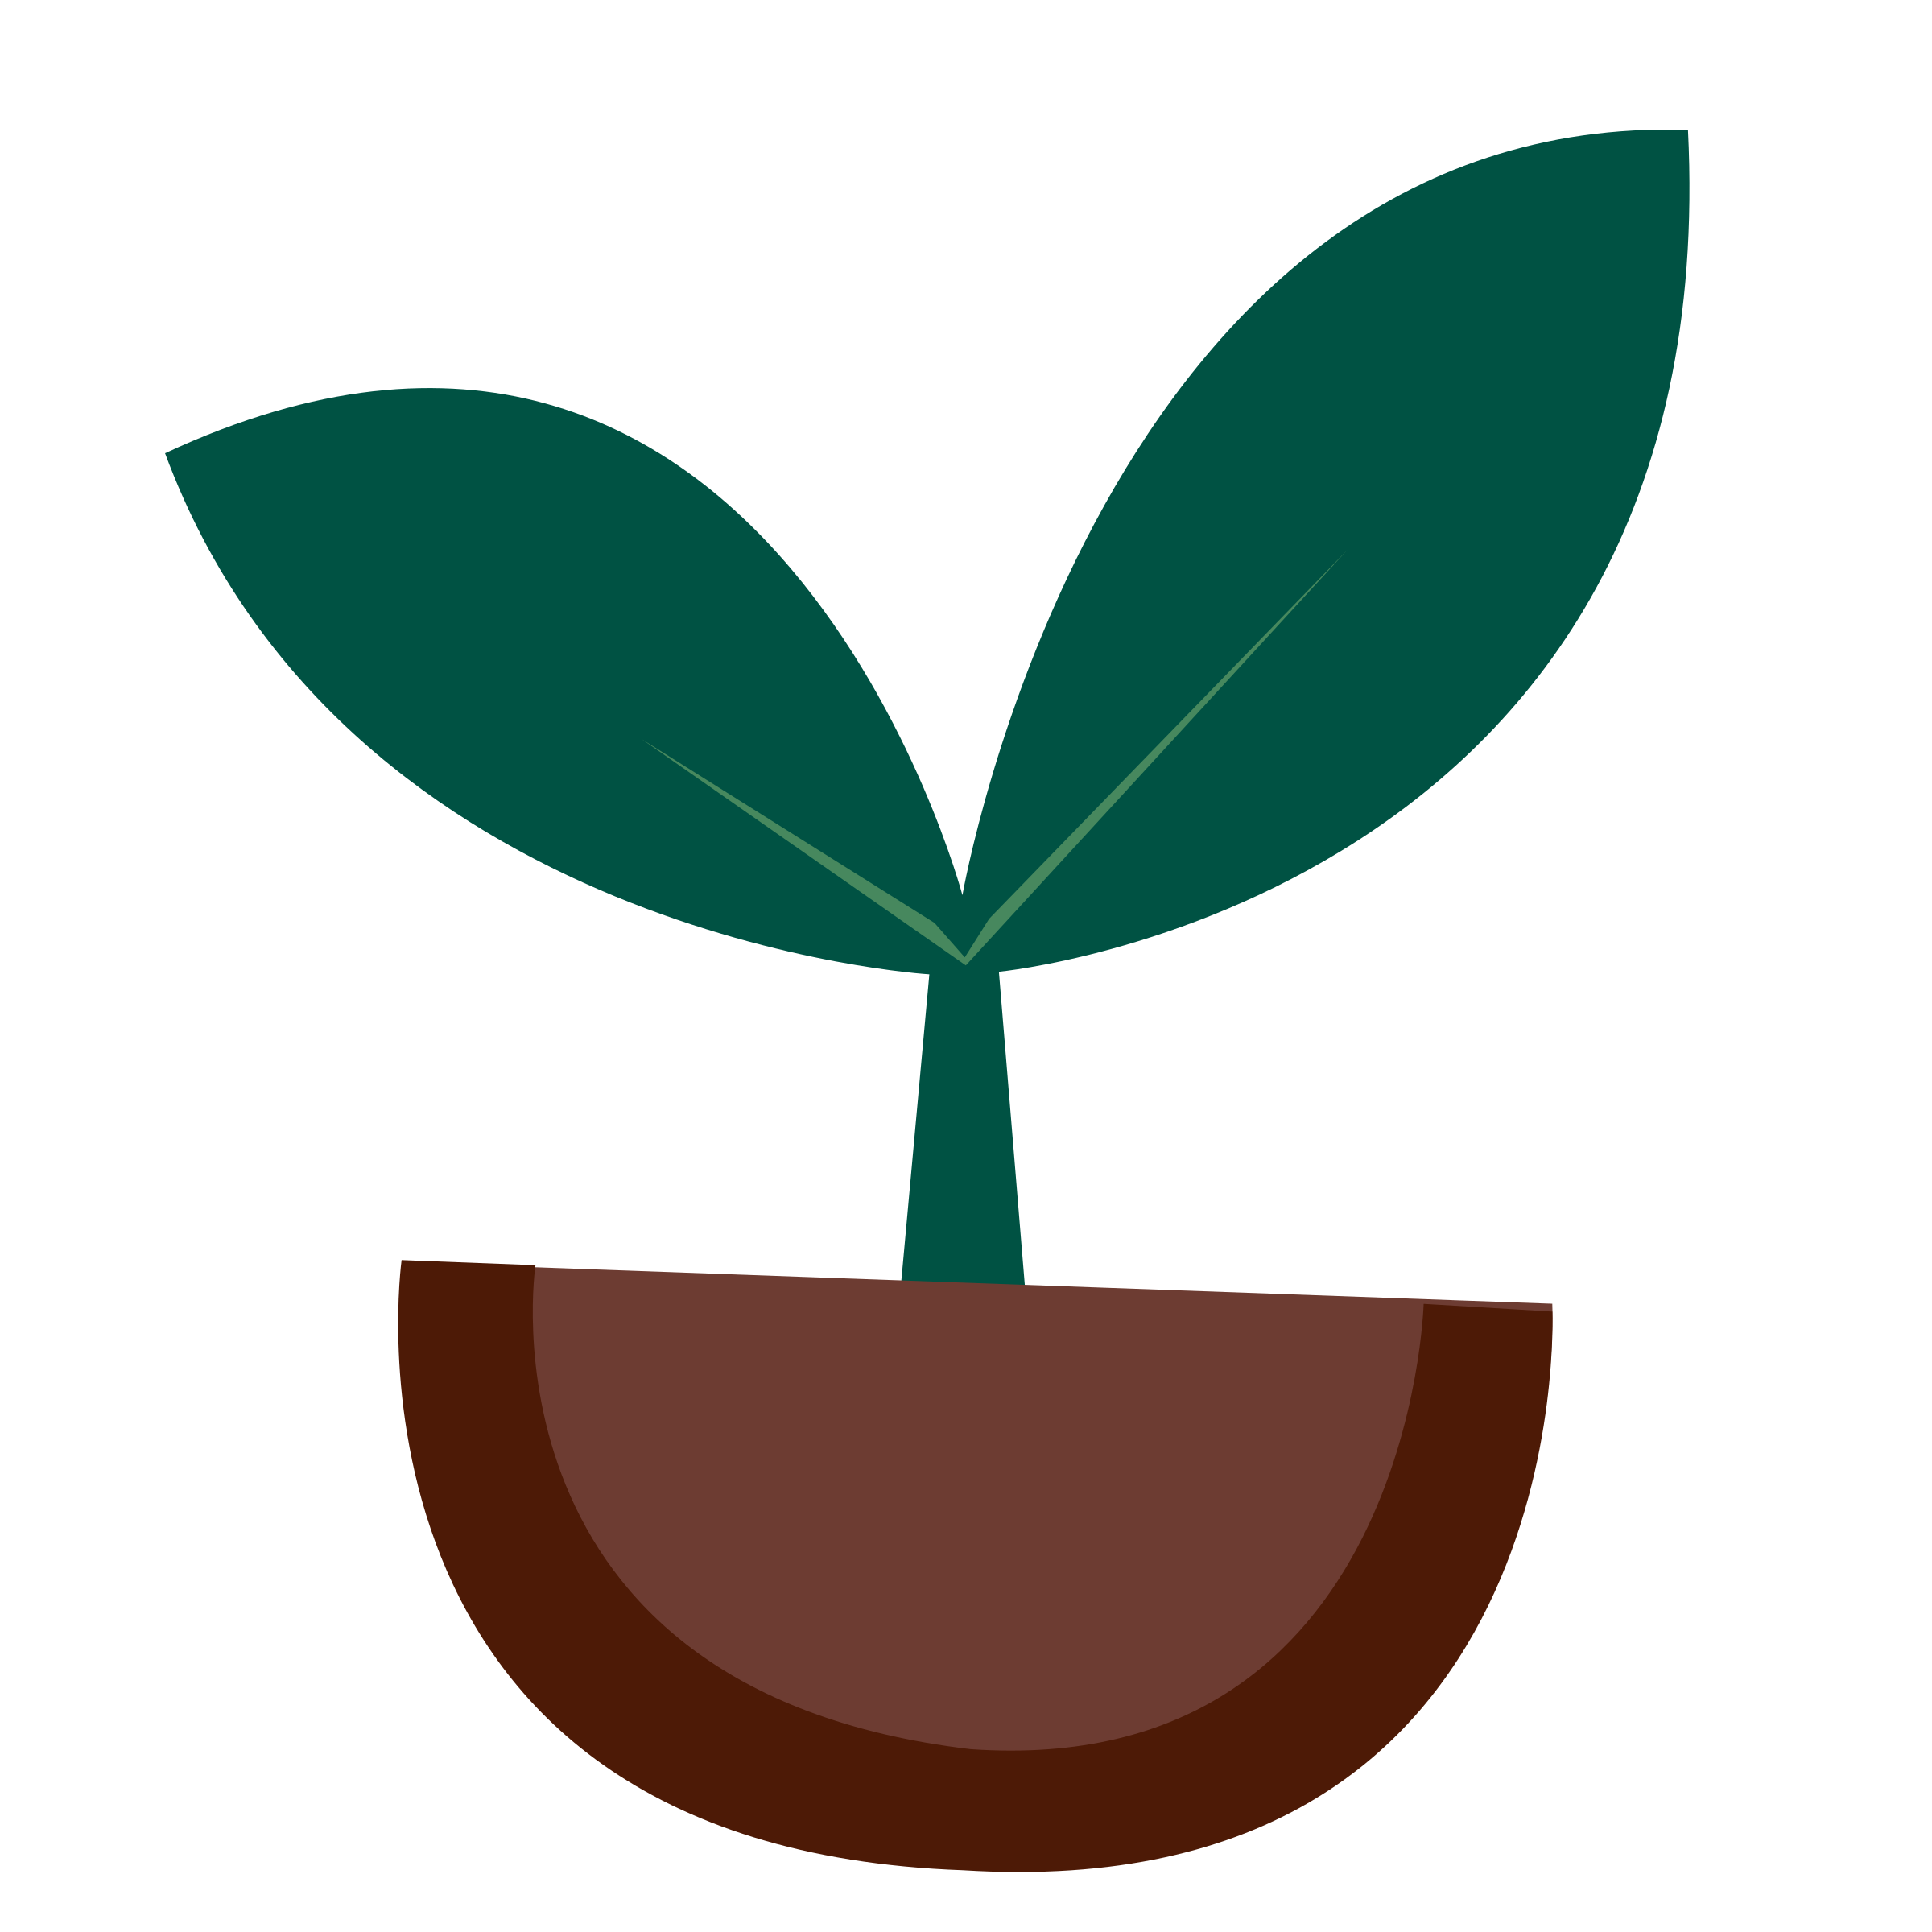 Growing plant clipart.